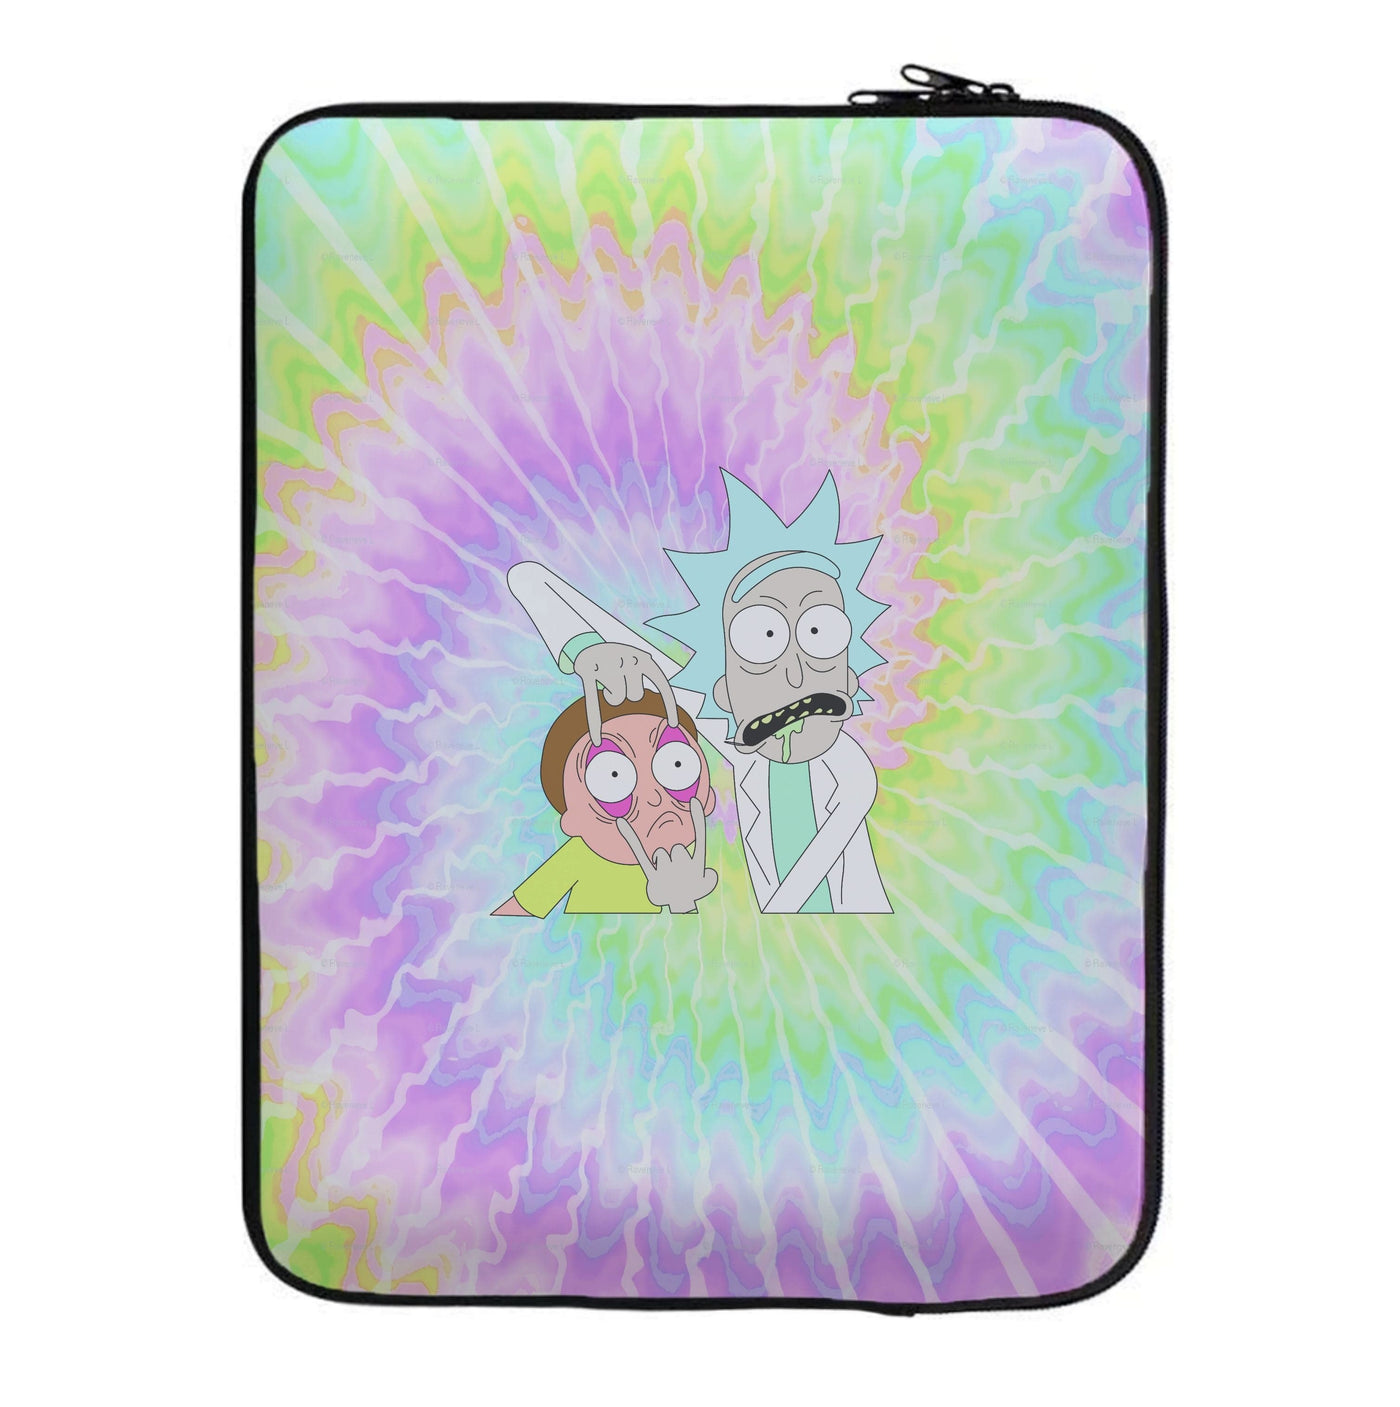 Psychedelic - Rick And Morty Laptop Sleeve